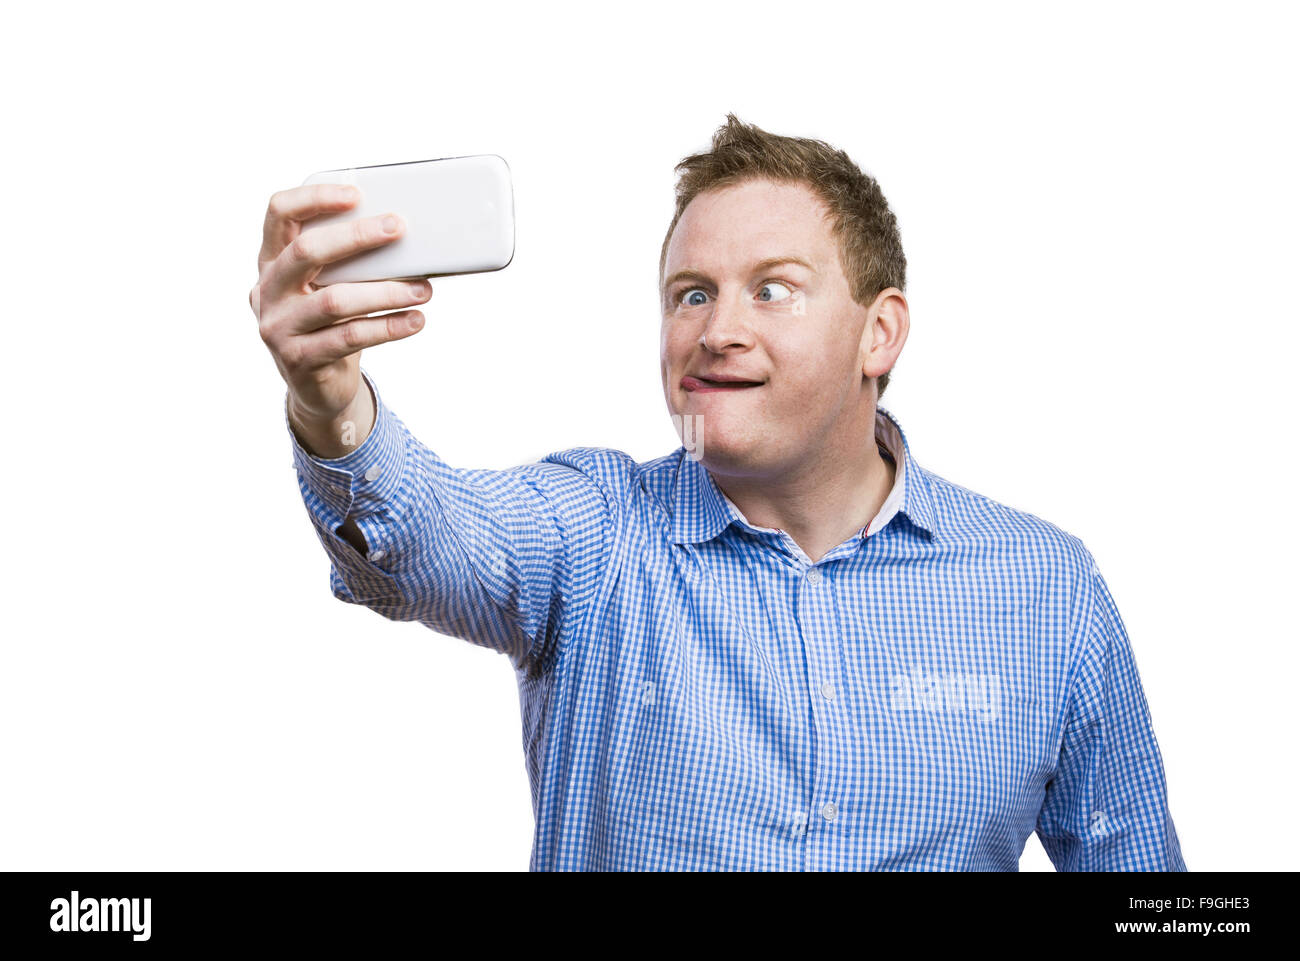 Man making funny faces while taking selfie of himself. Studio shot on white background. Stock Photo